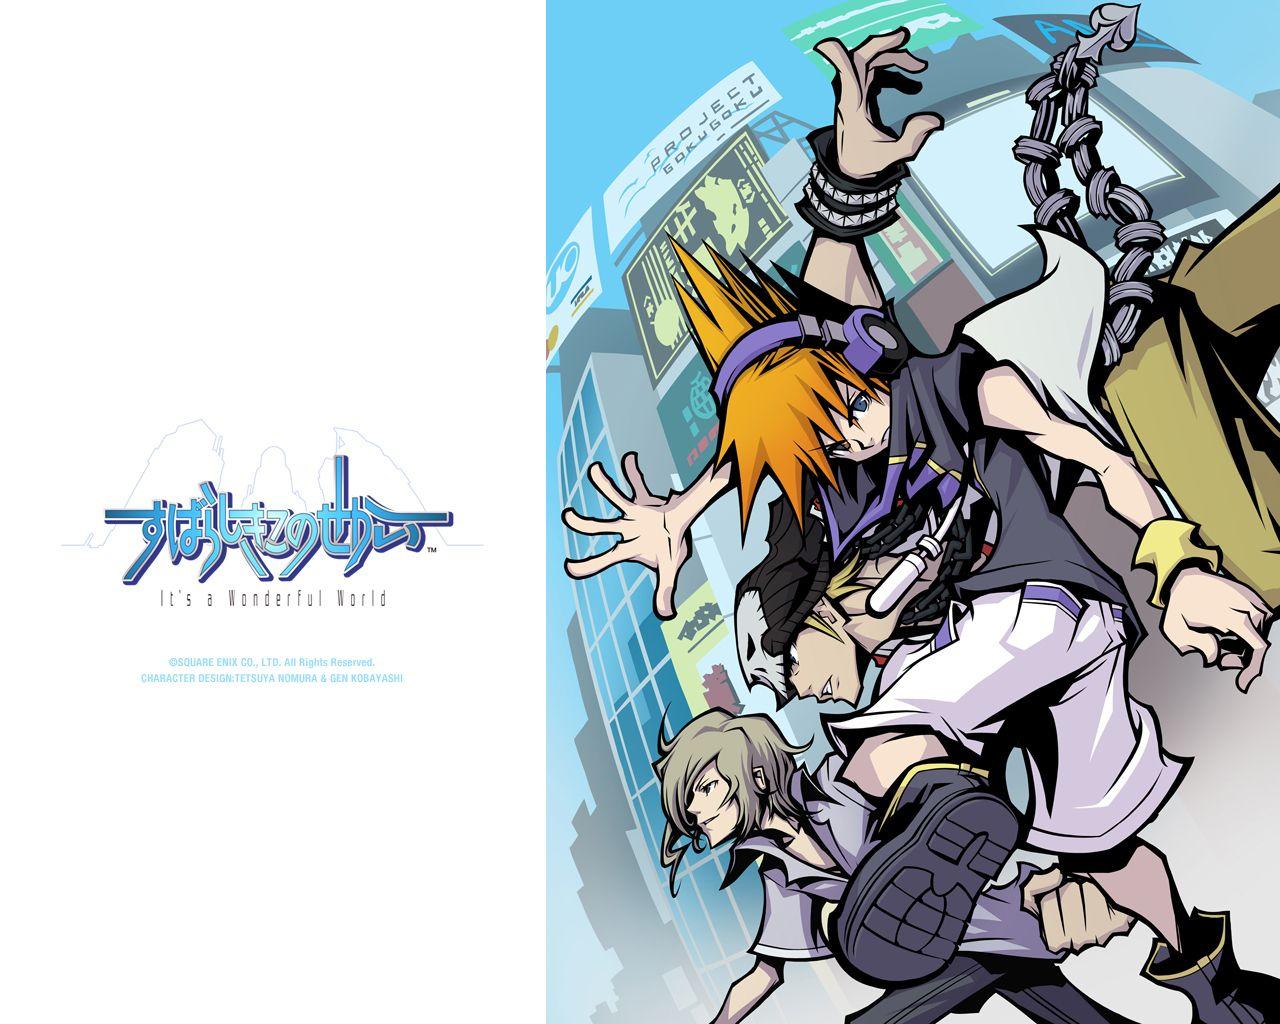 Index Of The World Ends With You Artwork Wallpaper 1280x1024